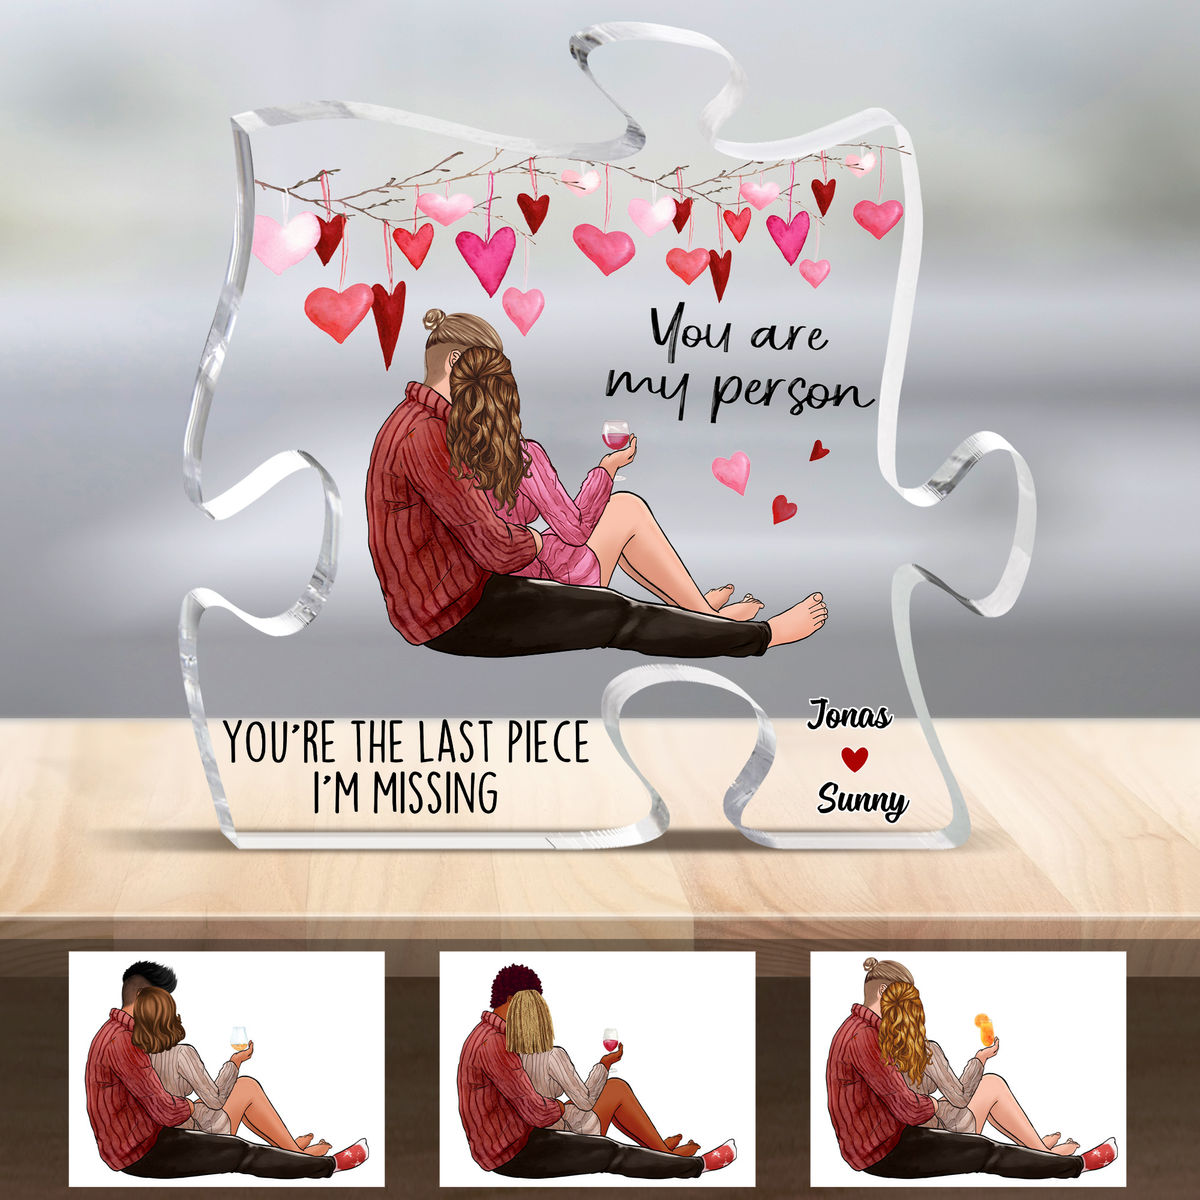 Personalized Desktop - Gifts For Couples - You are my person (22591) - Wedding Gifts , Anniversary Gifts, Valentine Gifts, Christmas Gifts